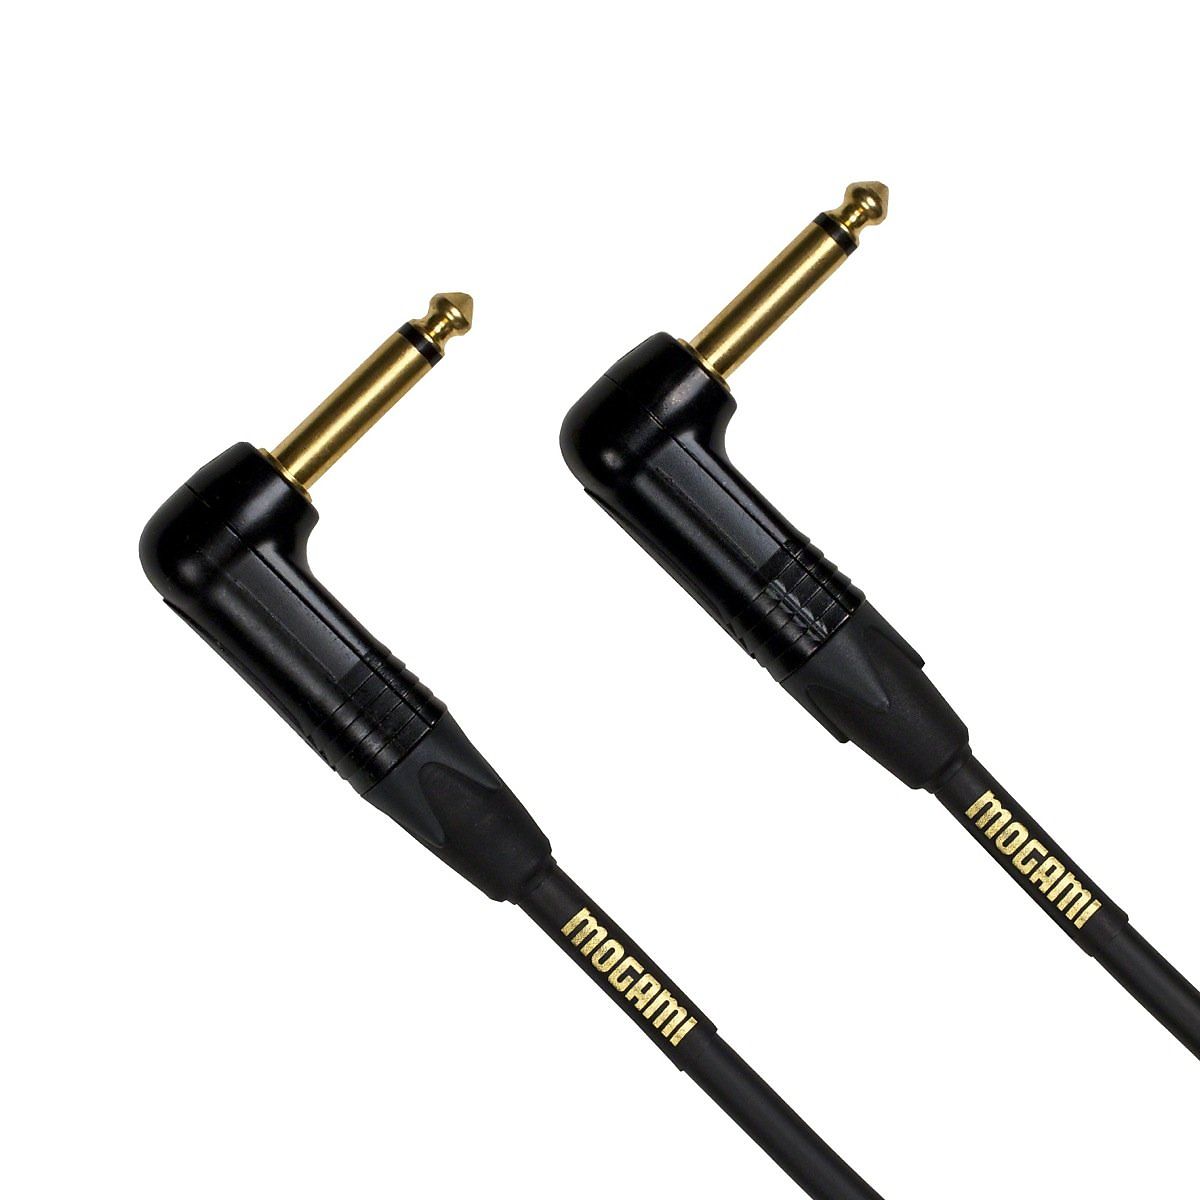 Mogami Gold Guitar/Instrument RR Cable with Right Angle Plugs, 1.5 Foot